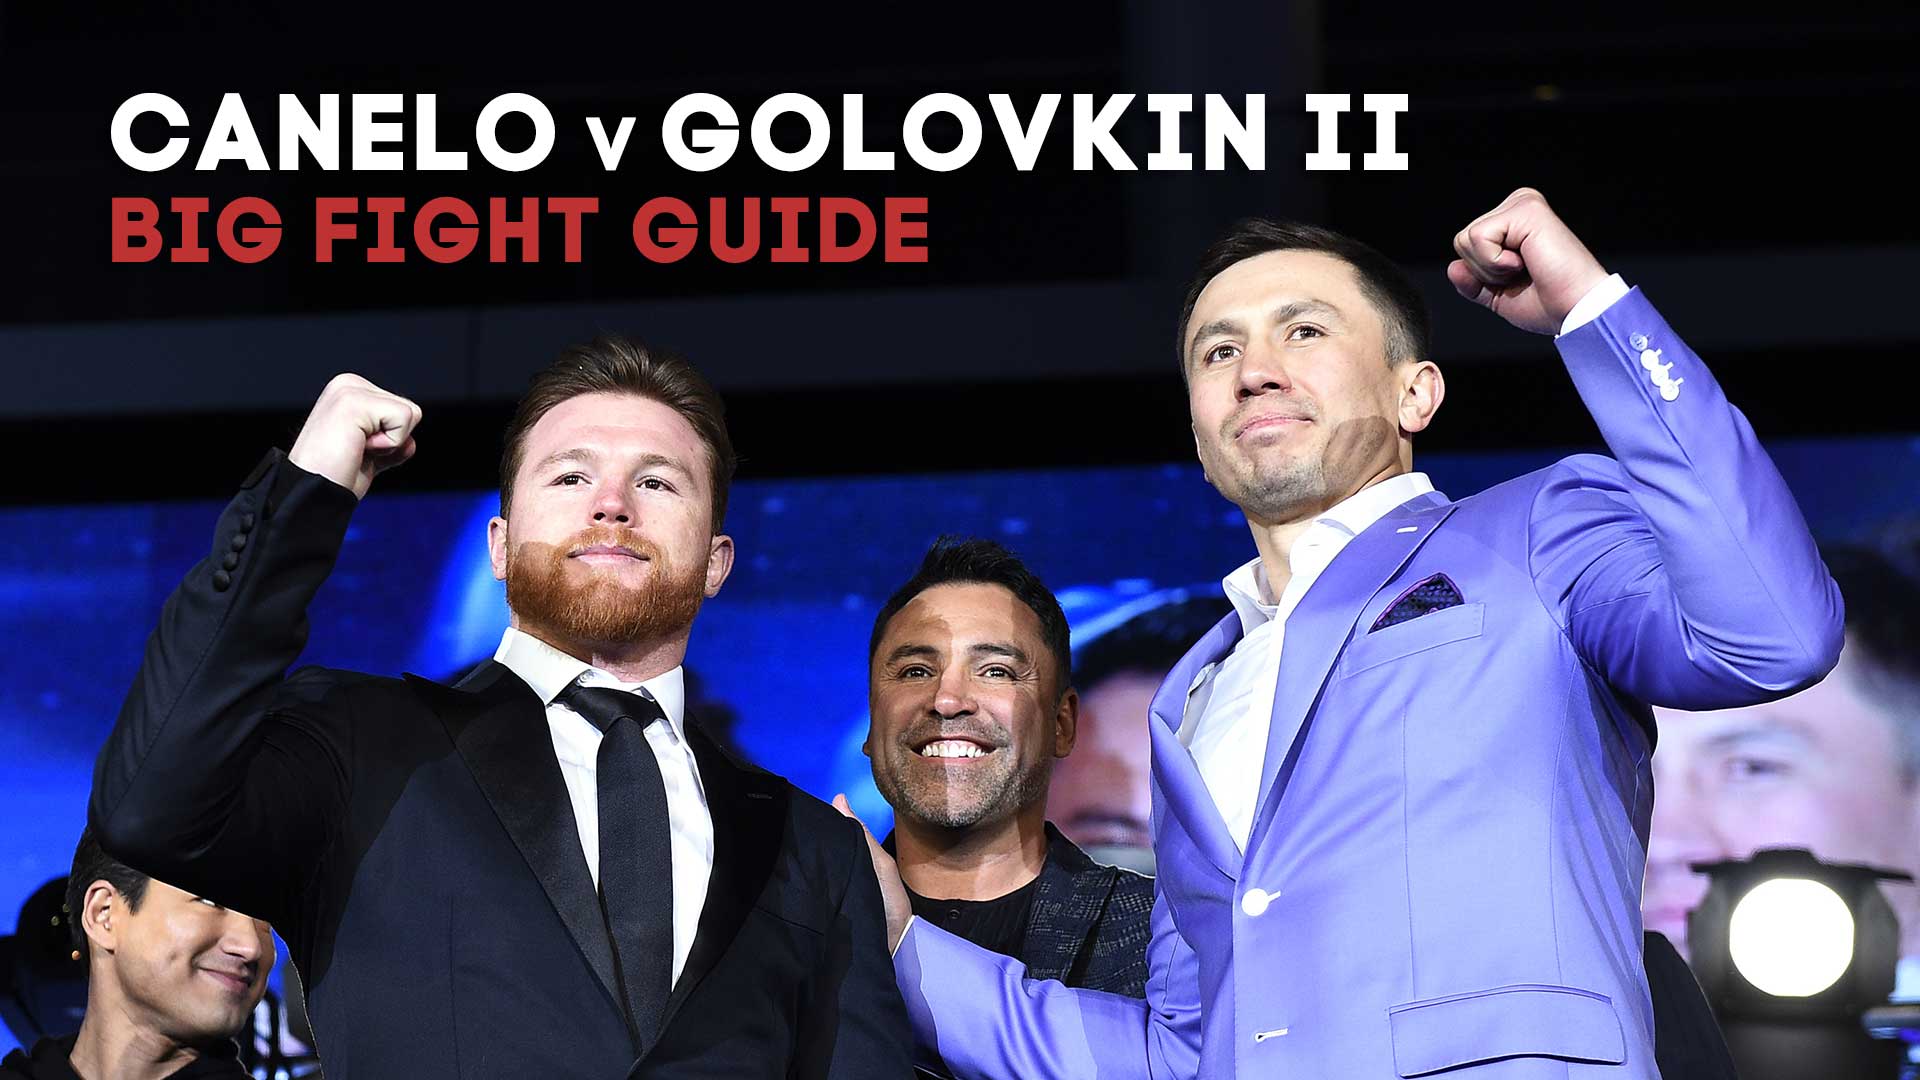 Canelo Alvarez v Gennady GGG Golovkin II Date, TV channel, tips, fight time, betting odds, records and undercard